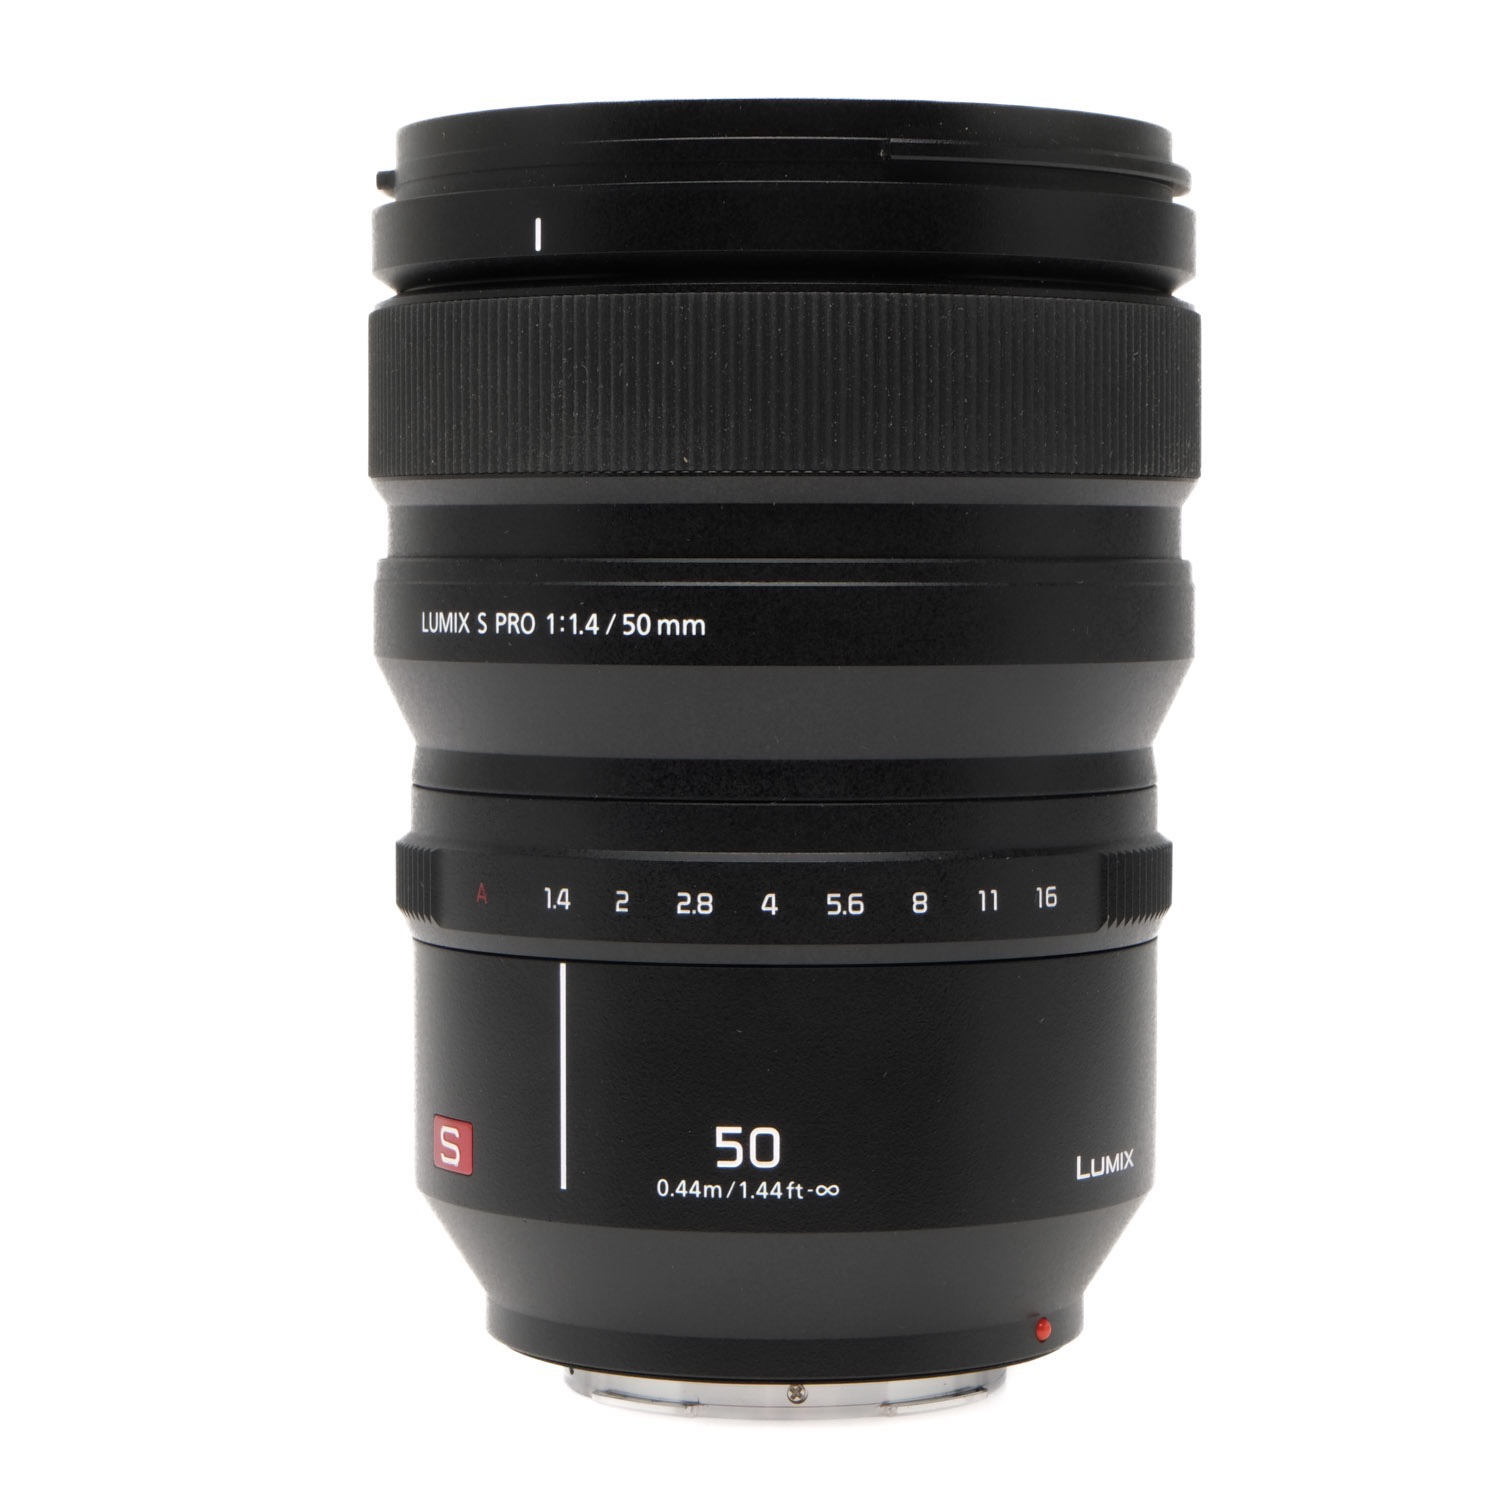 S 50mm Boxed XF908101018 | Leica Store - San Francisco